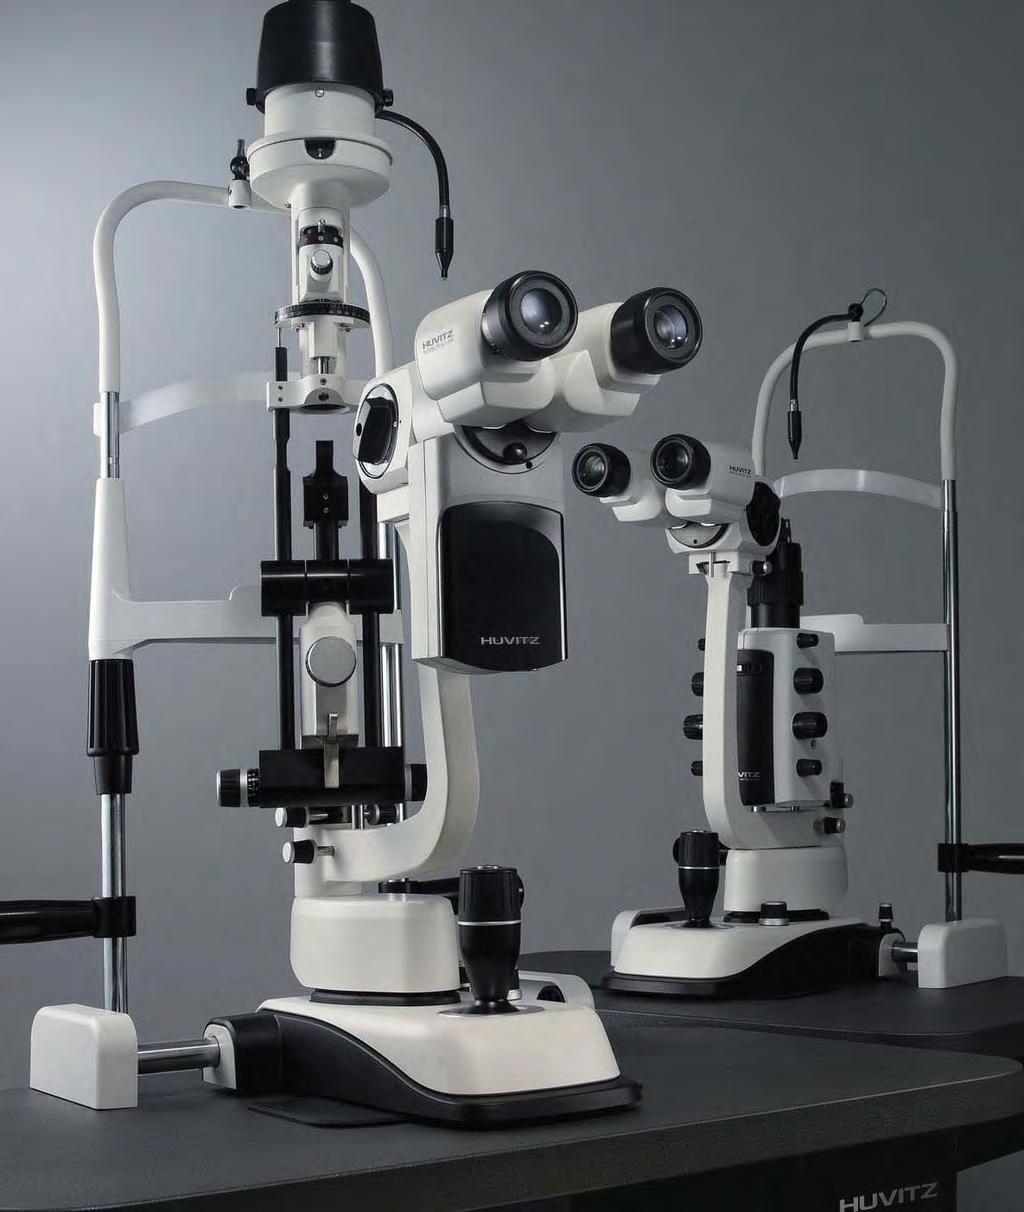 HUVITZ SLIT LAMP HS-7000 / HS-7500 Ultra high end optic system chosen by experienced industry professionals: HS-7000 and HS-7500